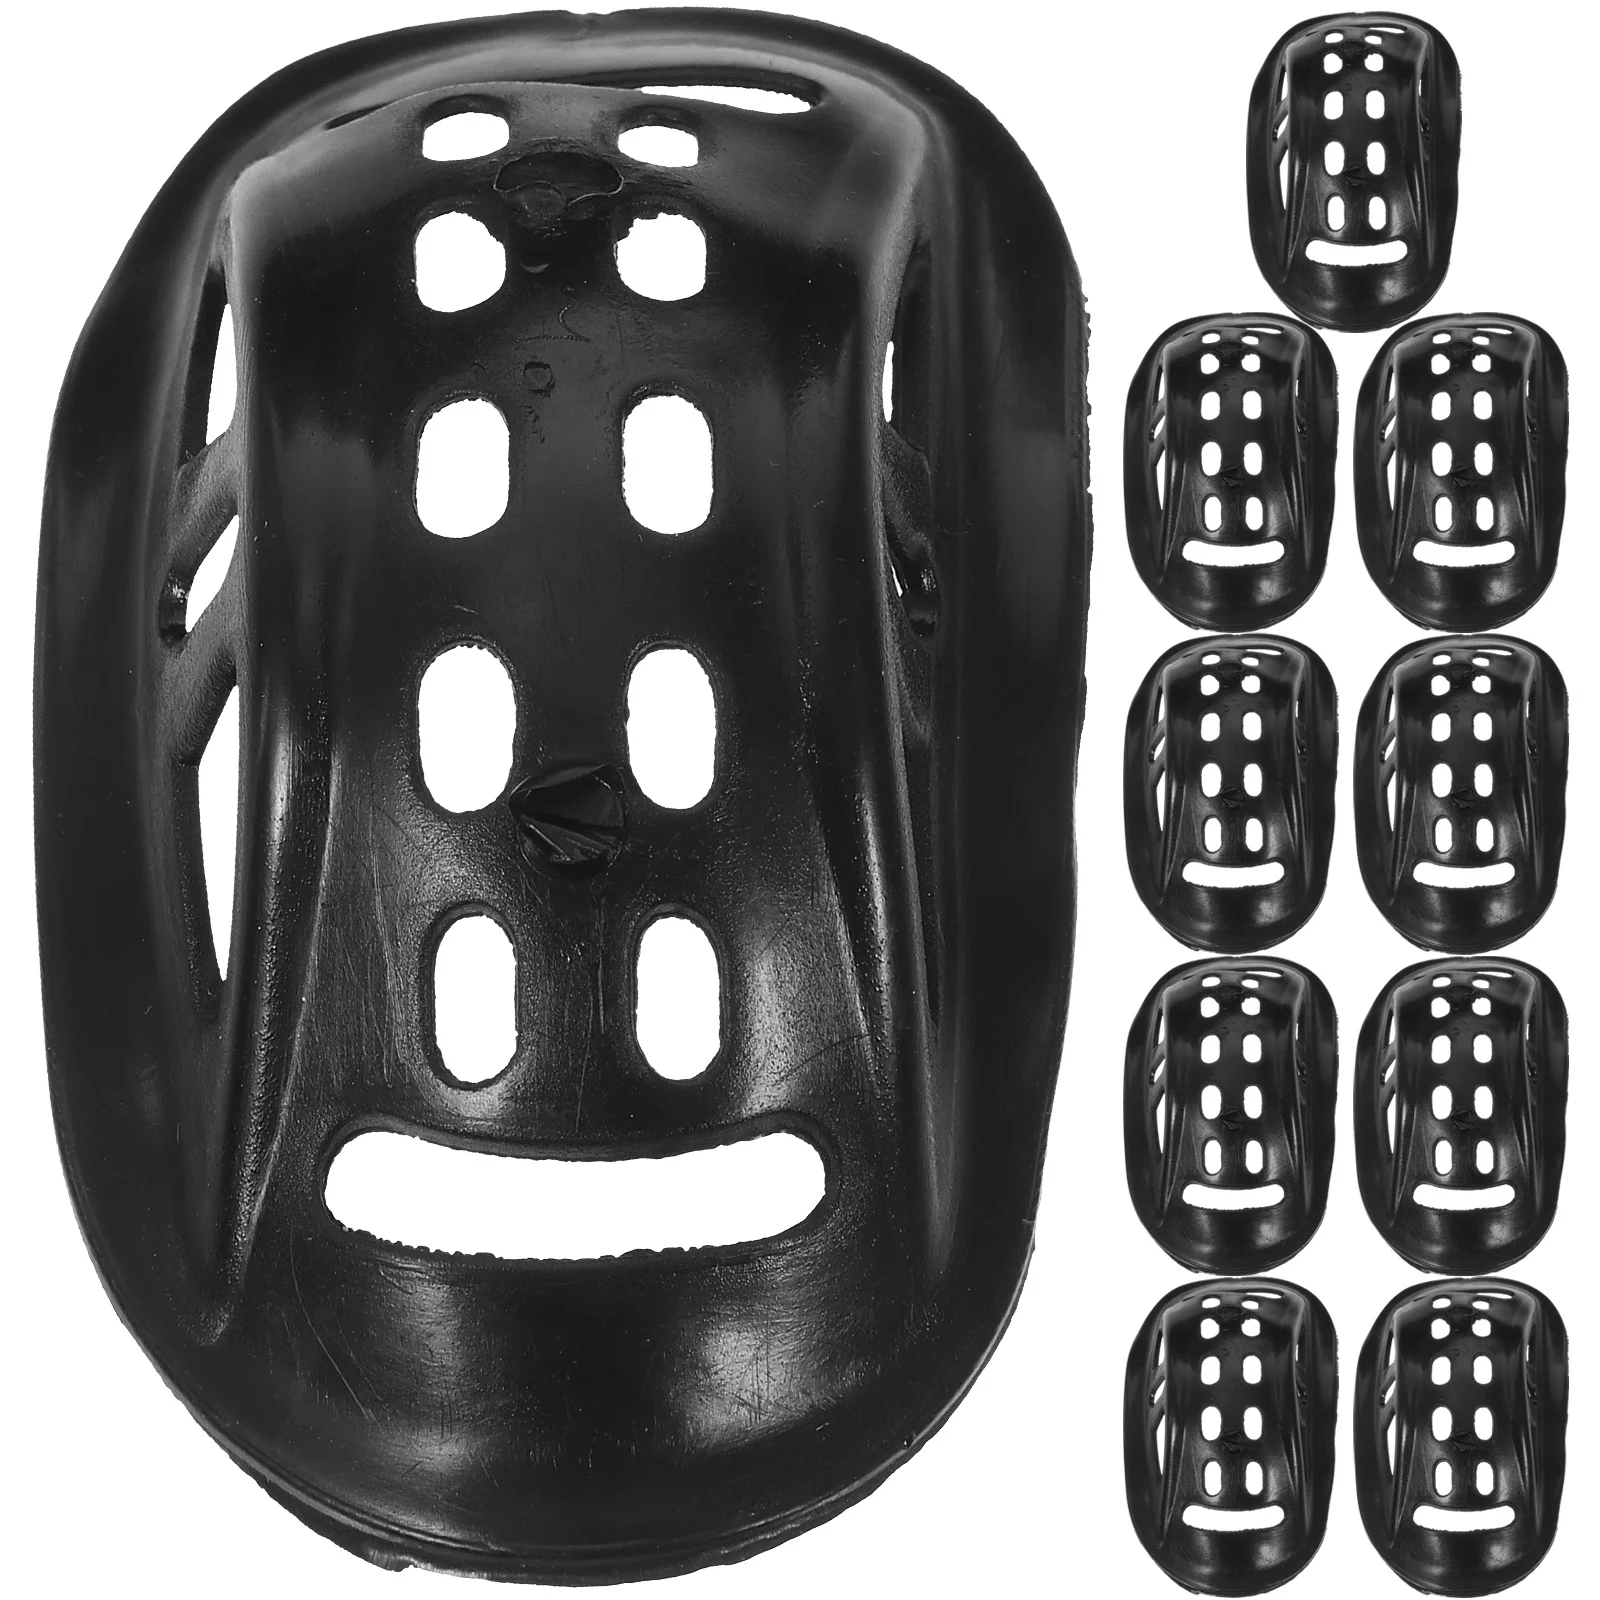 

10 Pcs Chin Rest Eyeblack Baseball Safety Cup Pads Rubber Accessory Sports Cycling